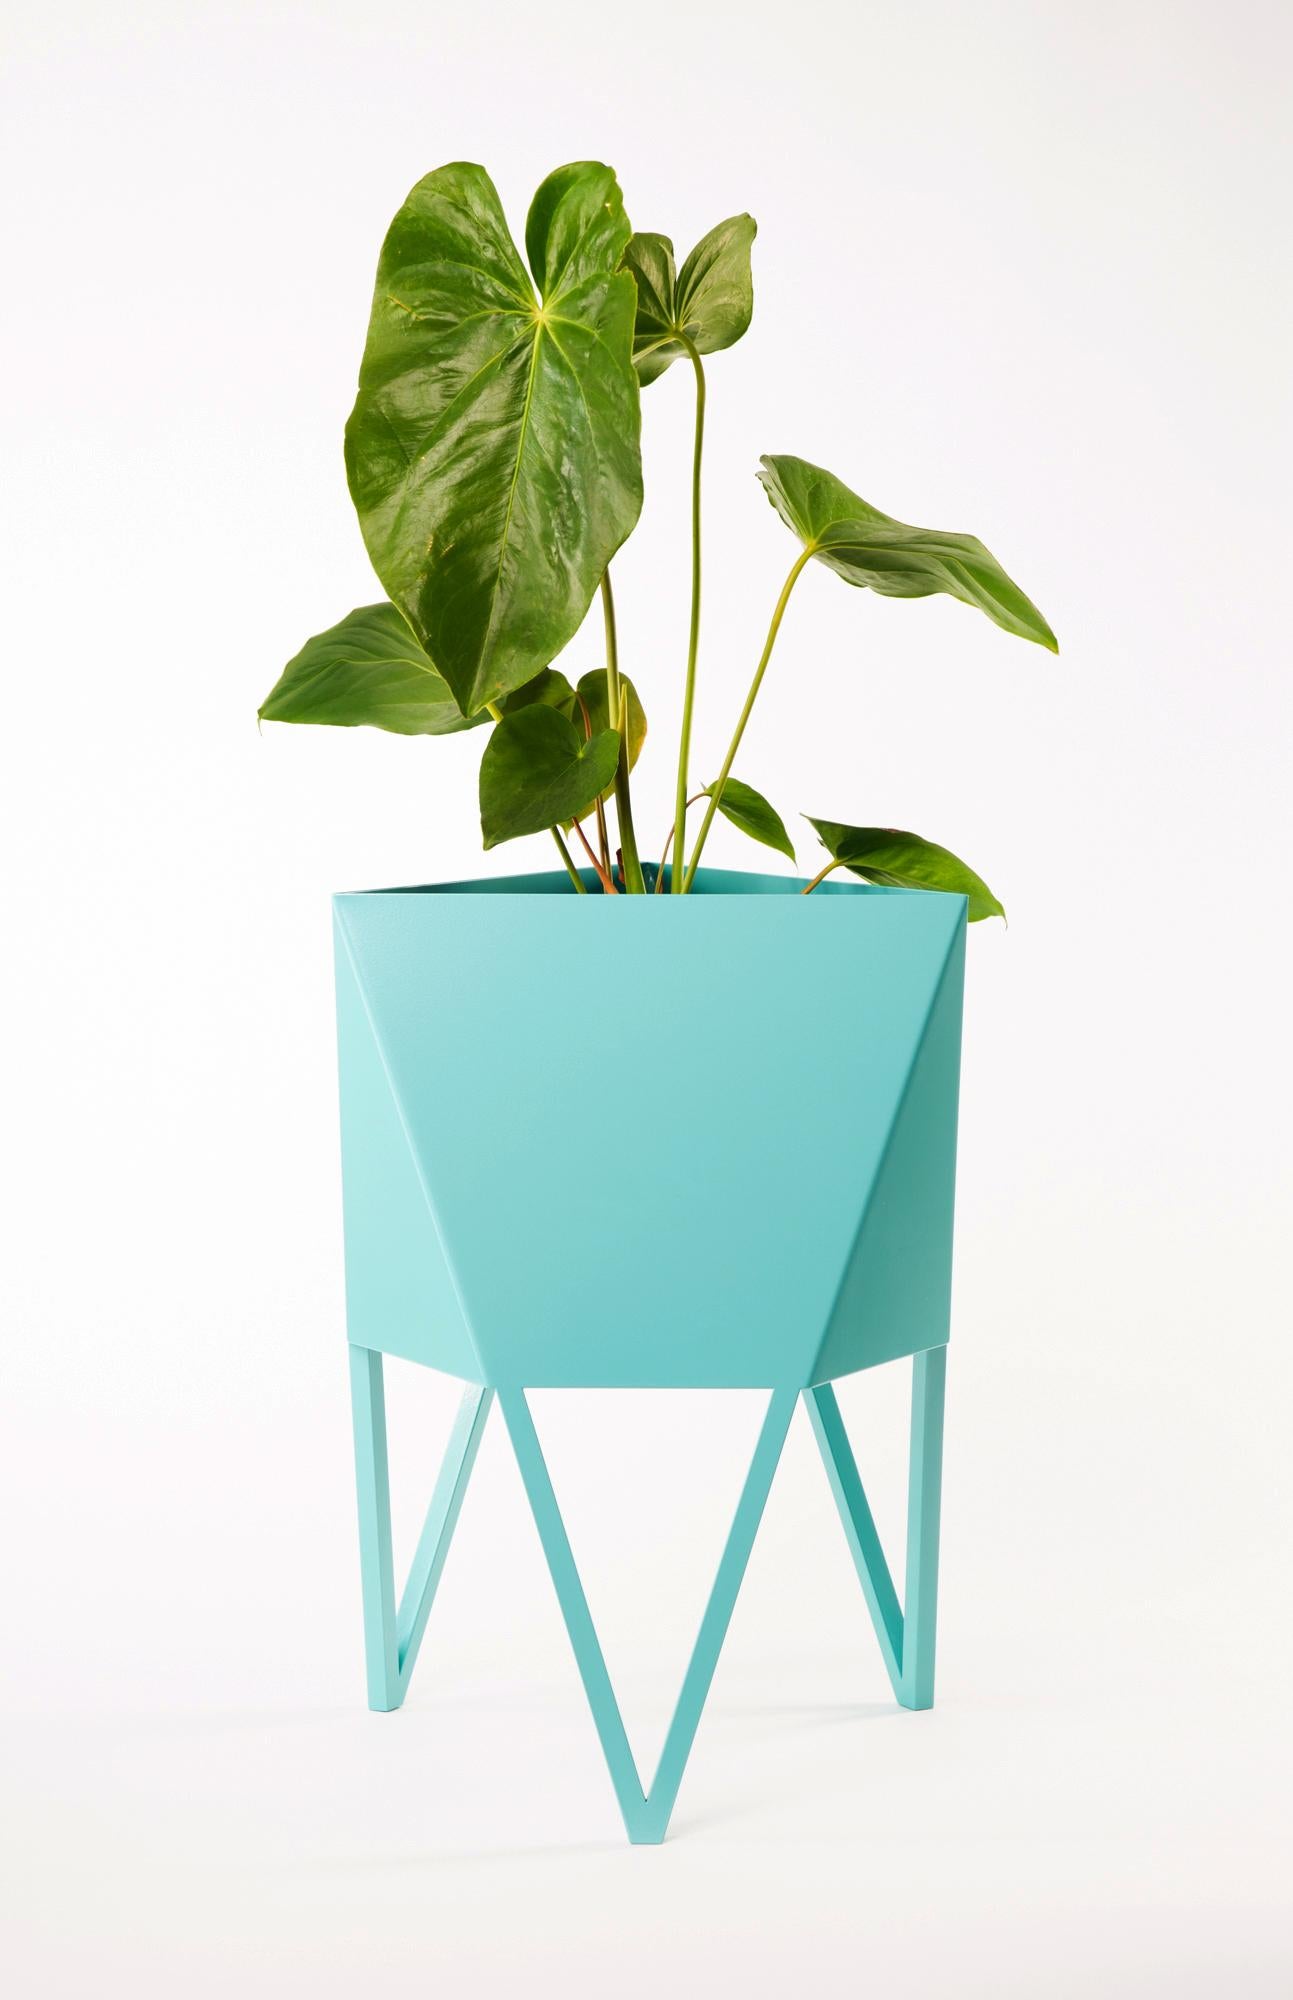 Steel Deca Planter in Mineral, Small, by Force/Collide, 2023